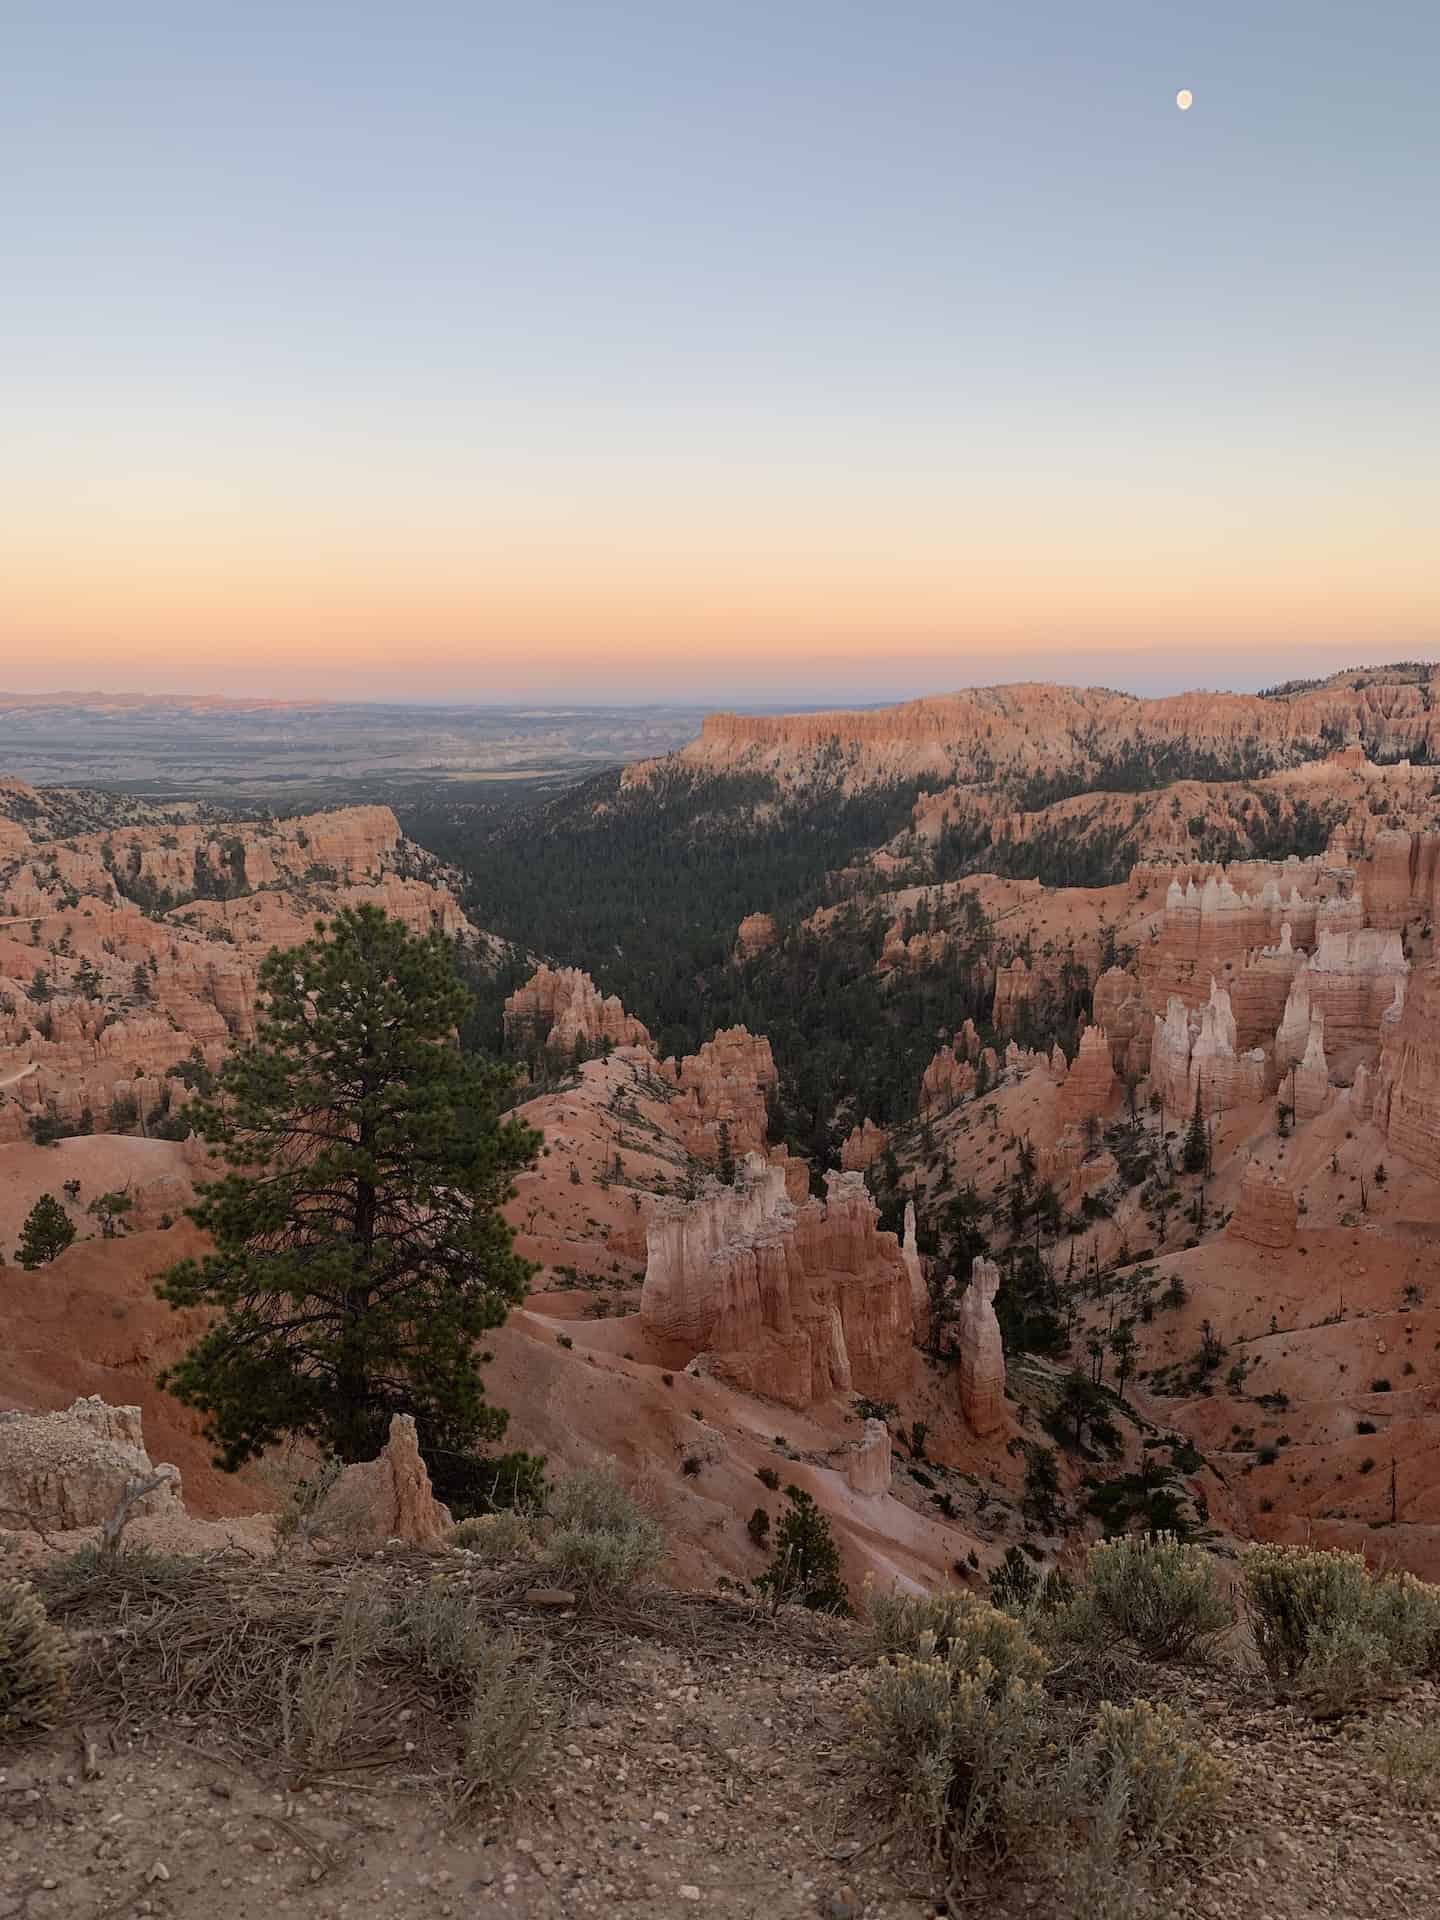 BRYCE CANYON NATIONAL PARK